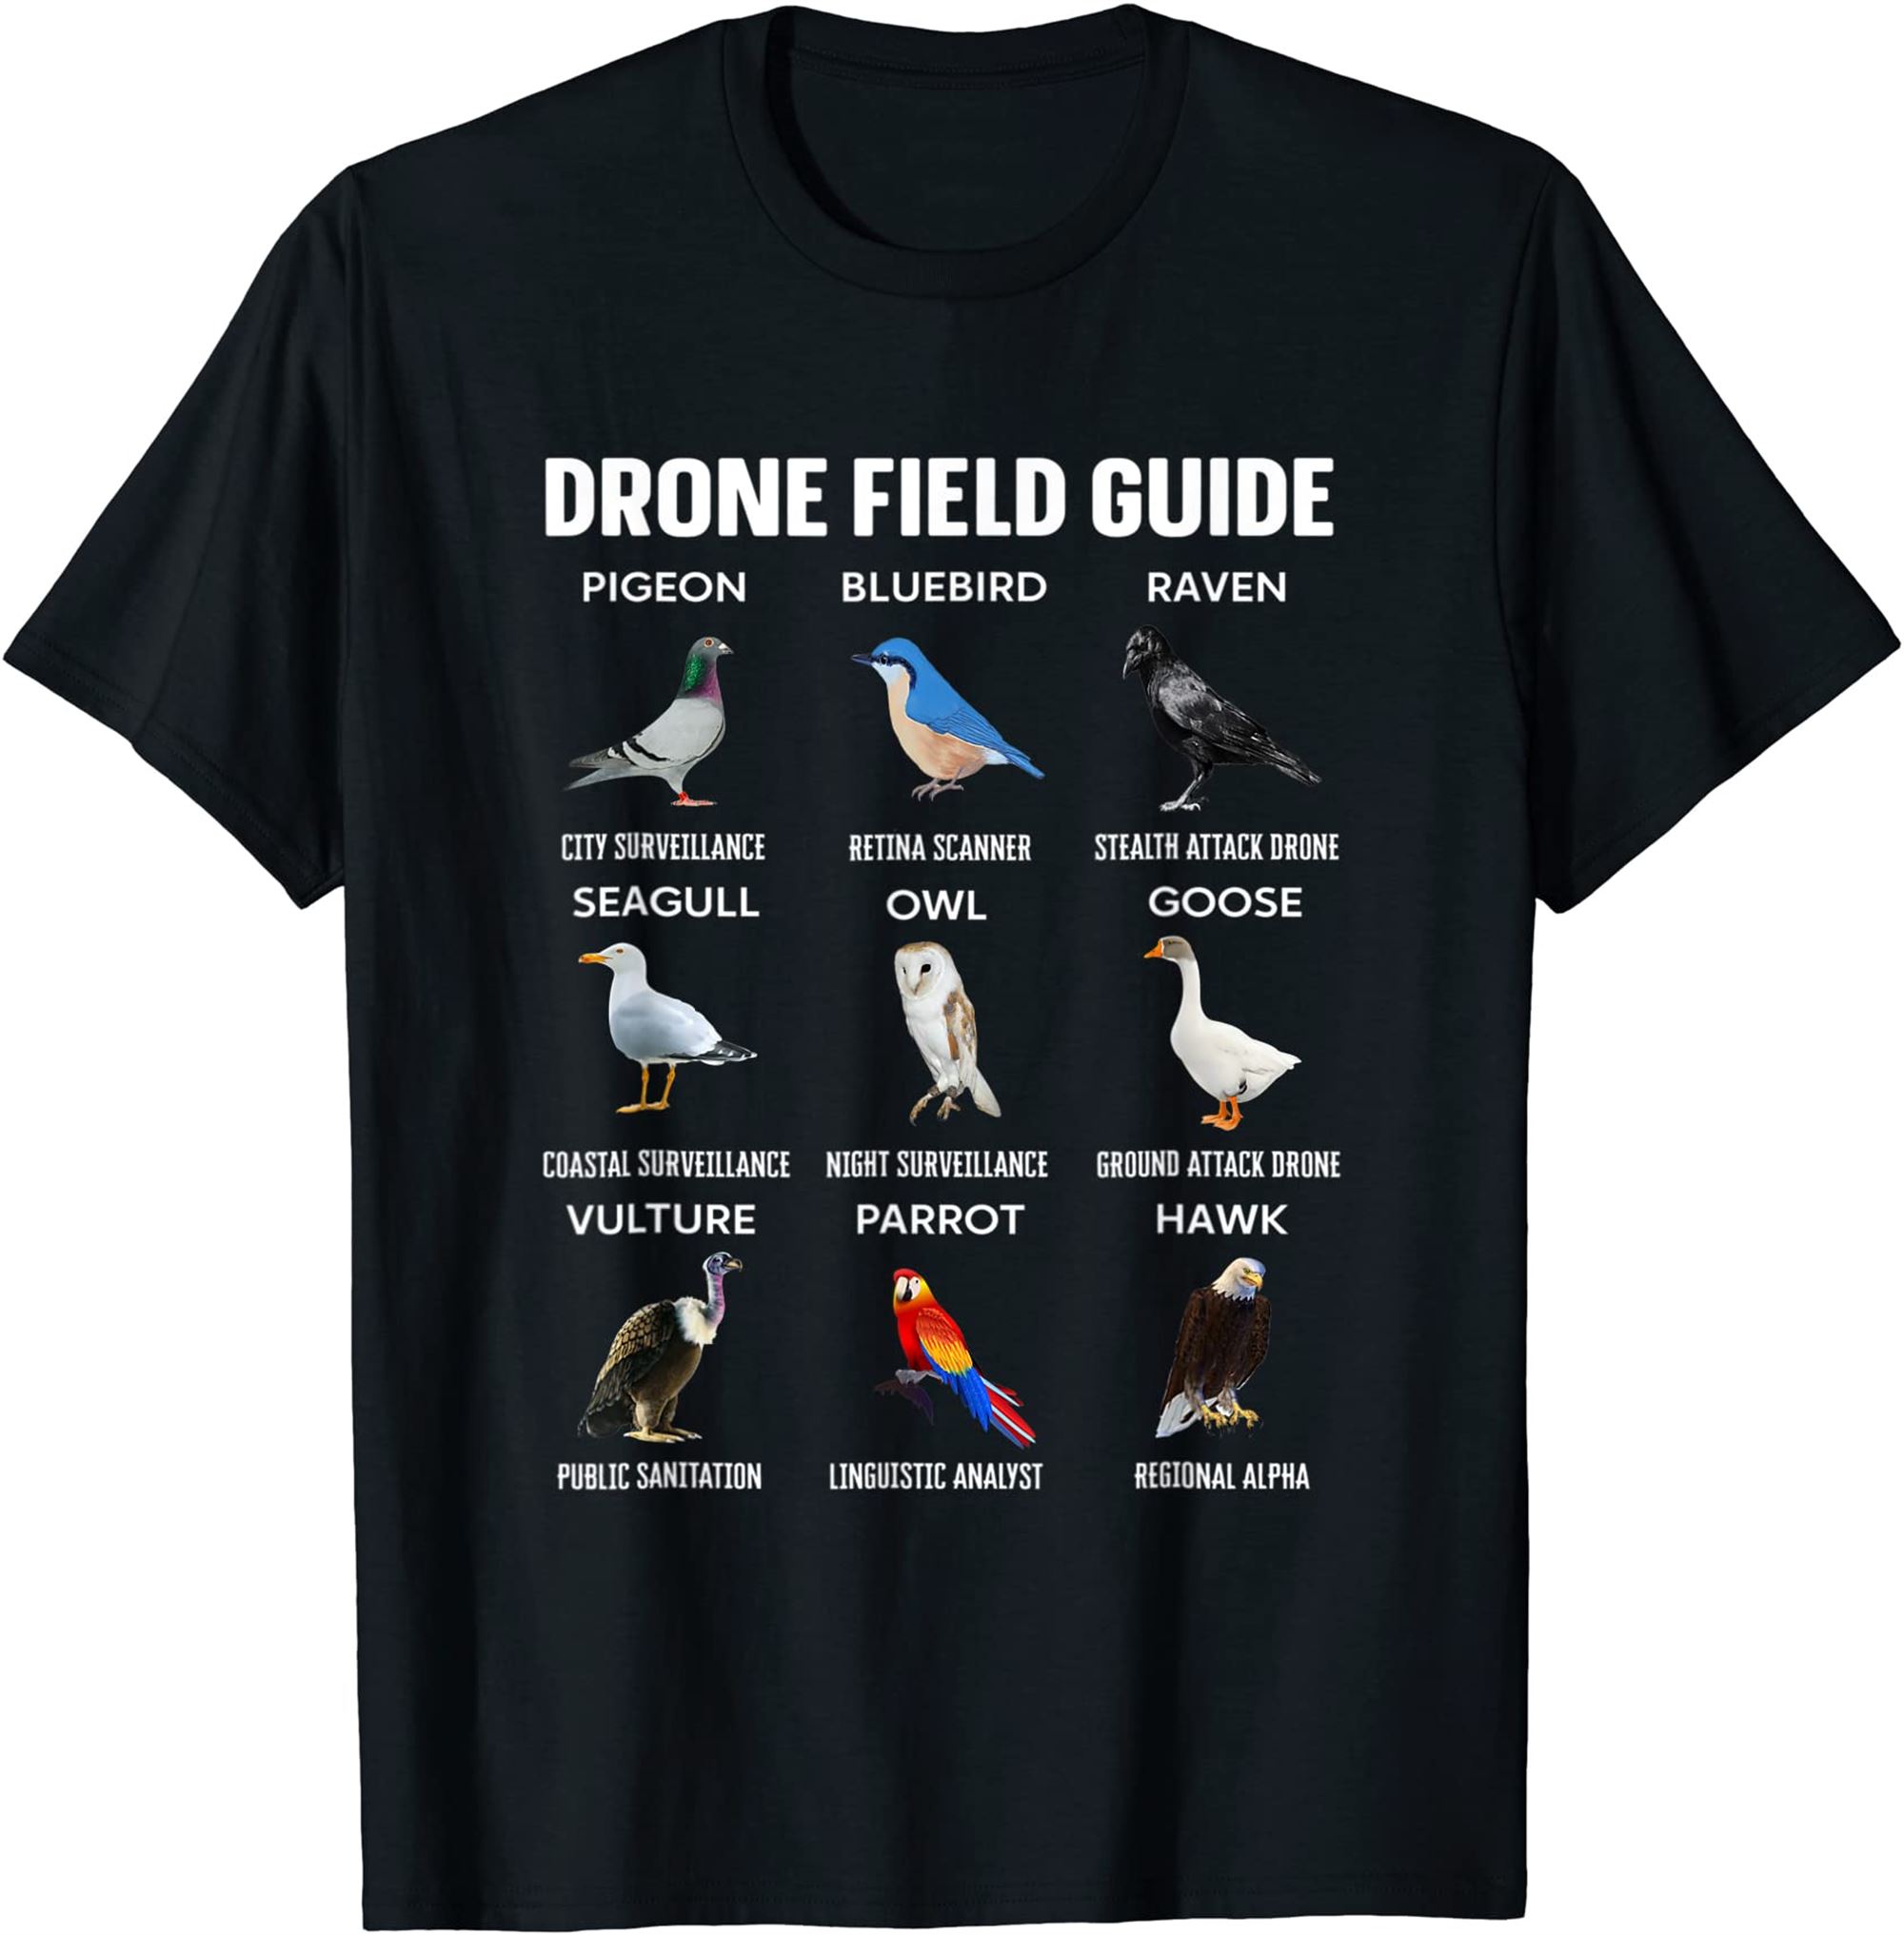 Birds Drone Field Guide They Arent Real T-shirt Plus Size Up To 5xl